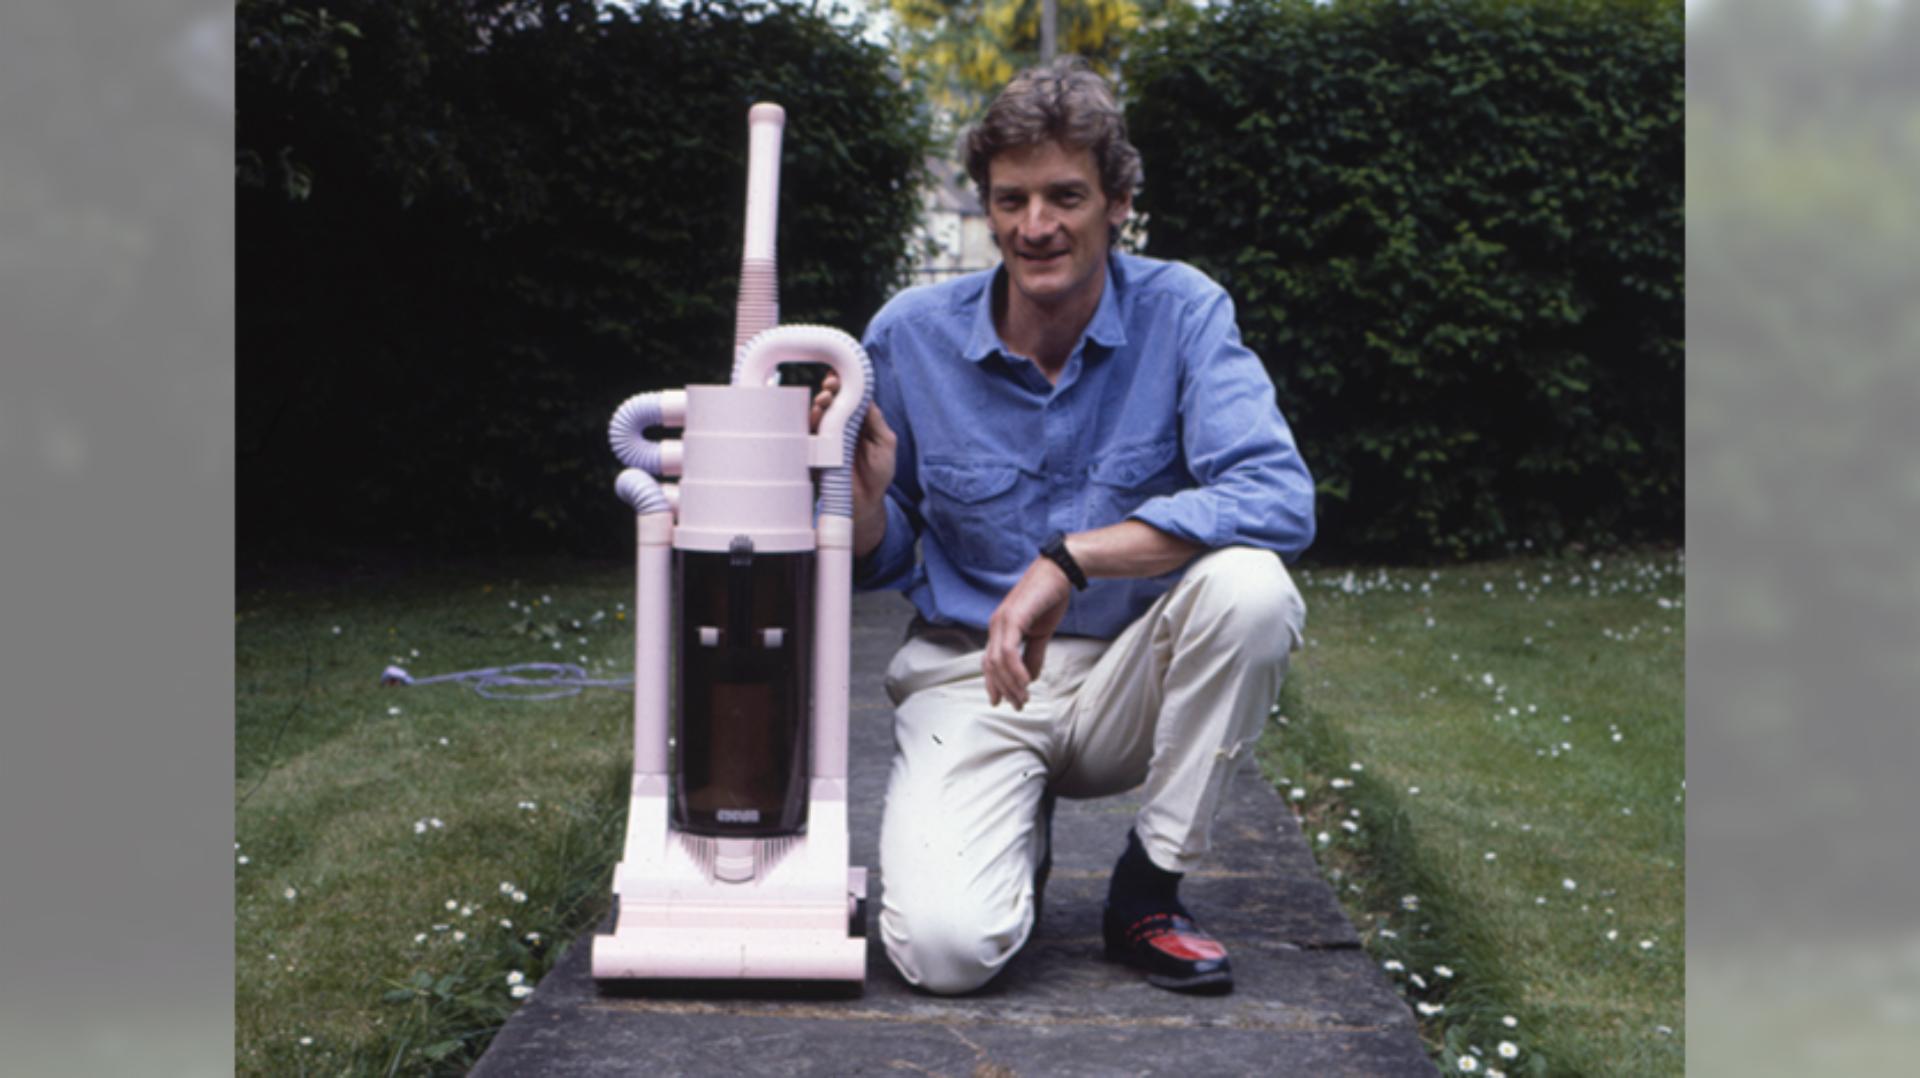 James Dyson crouching next to a G-Force